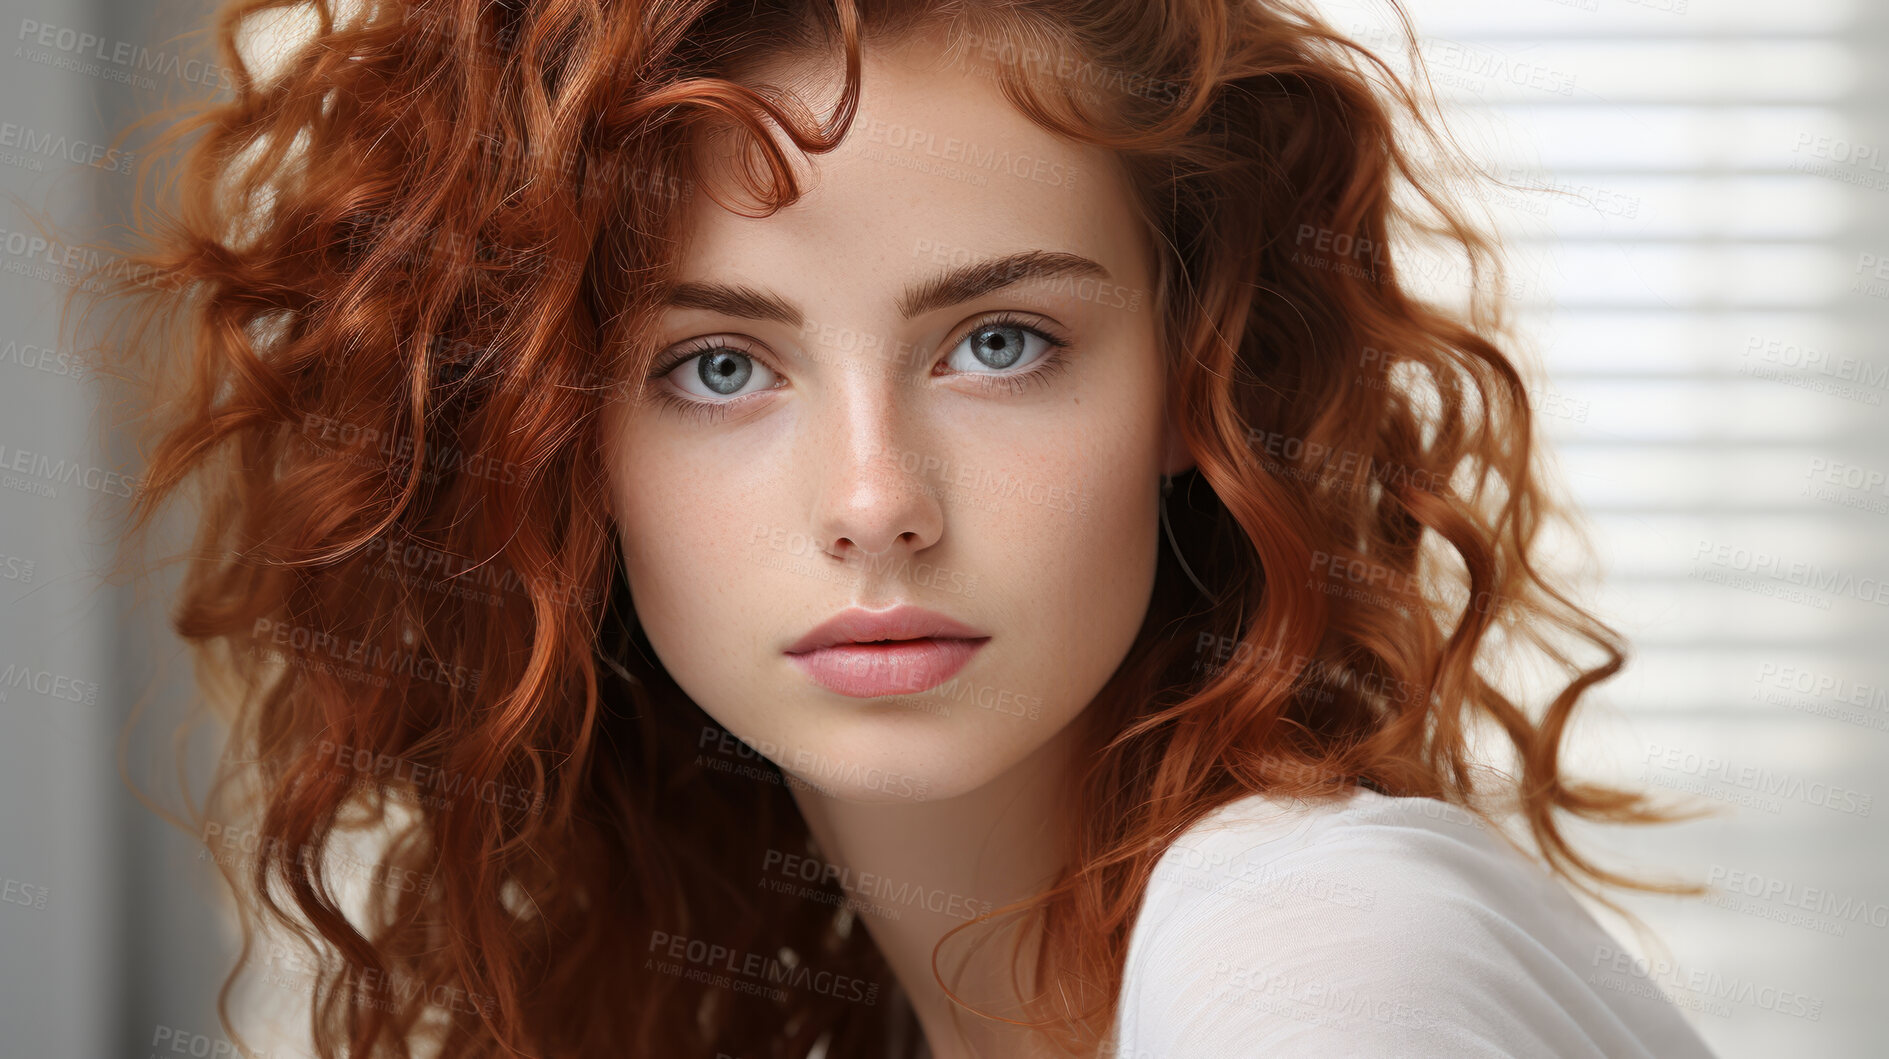 Buy stock photo Close-up portrait of model. Make-up, freckle skin. Natural light. Fashion, editorial concept.